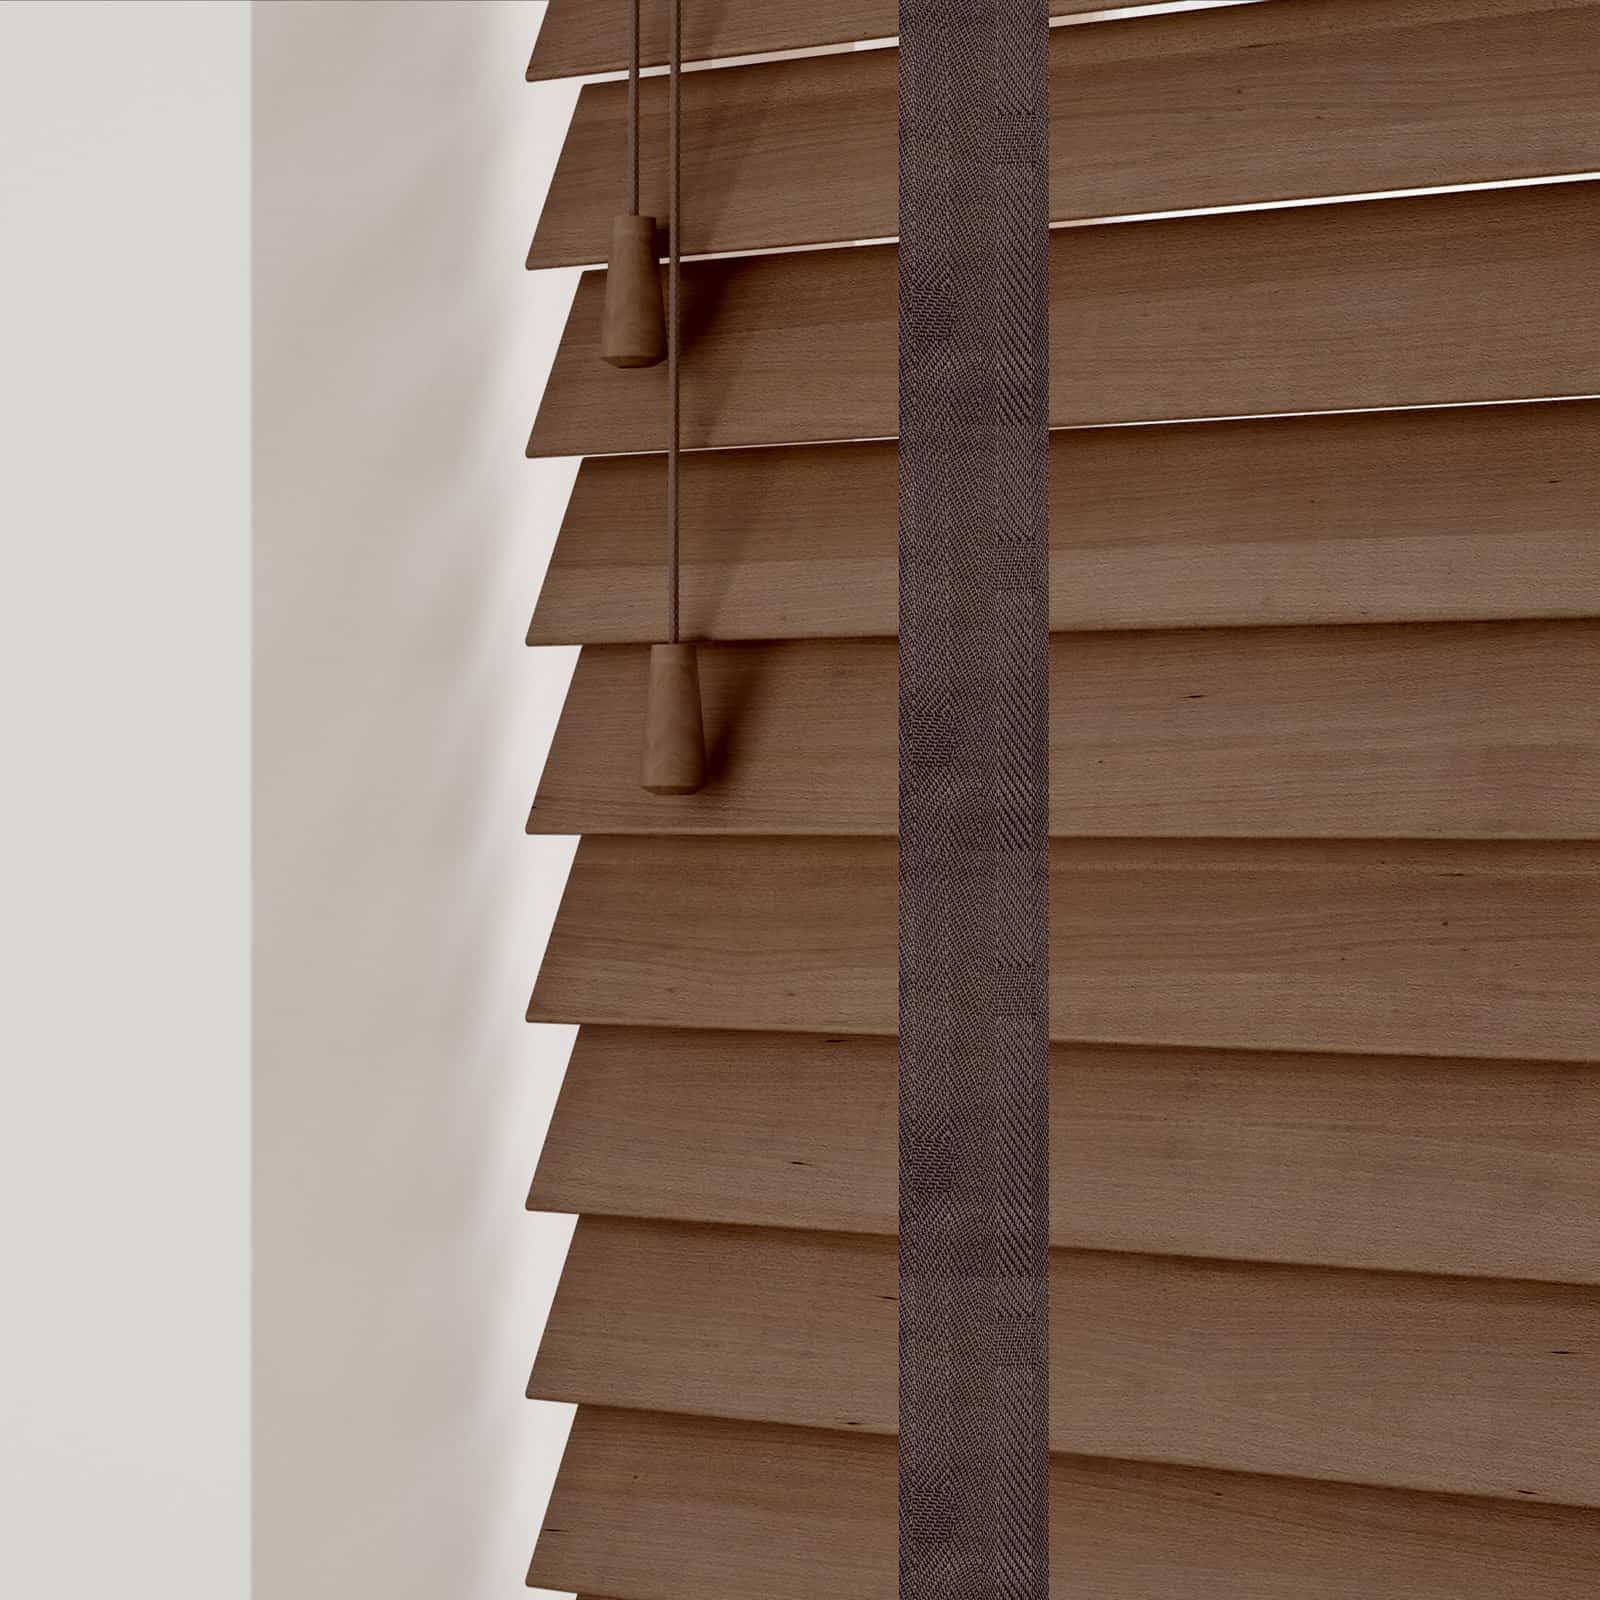 Auburn Dark Wood Venetian Blind With Tapes Shutters And Blinds Online